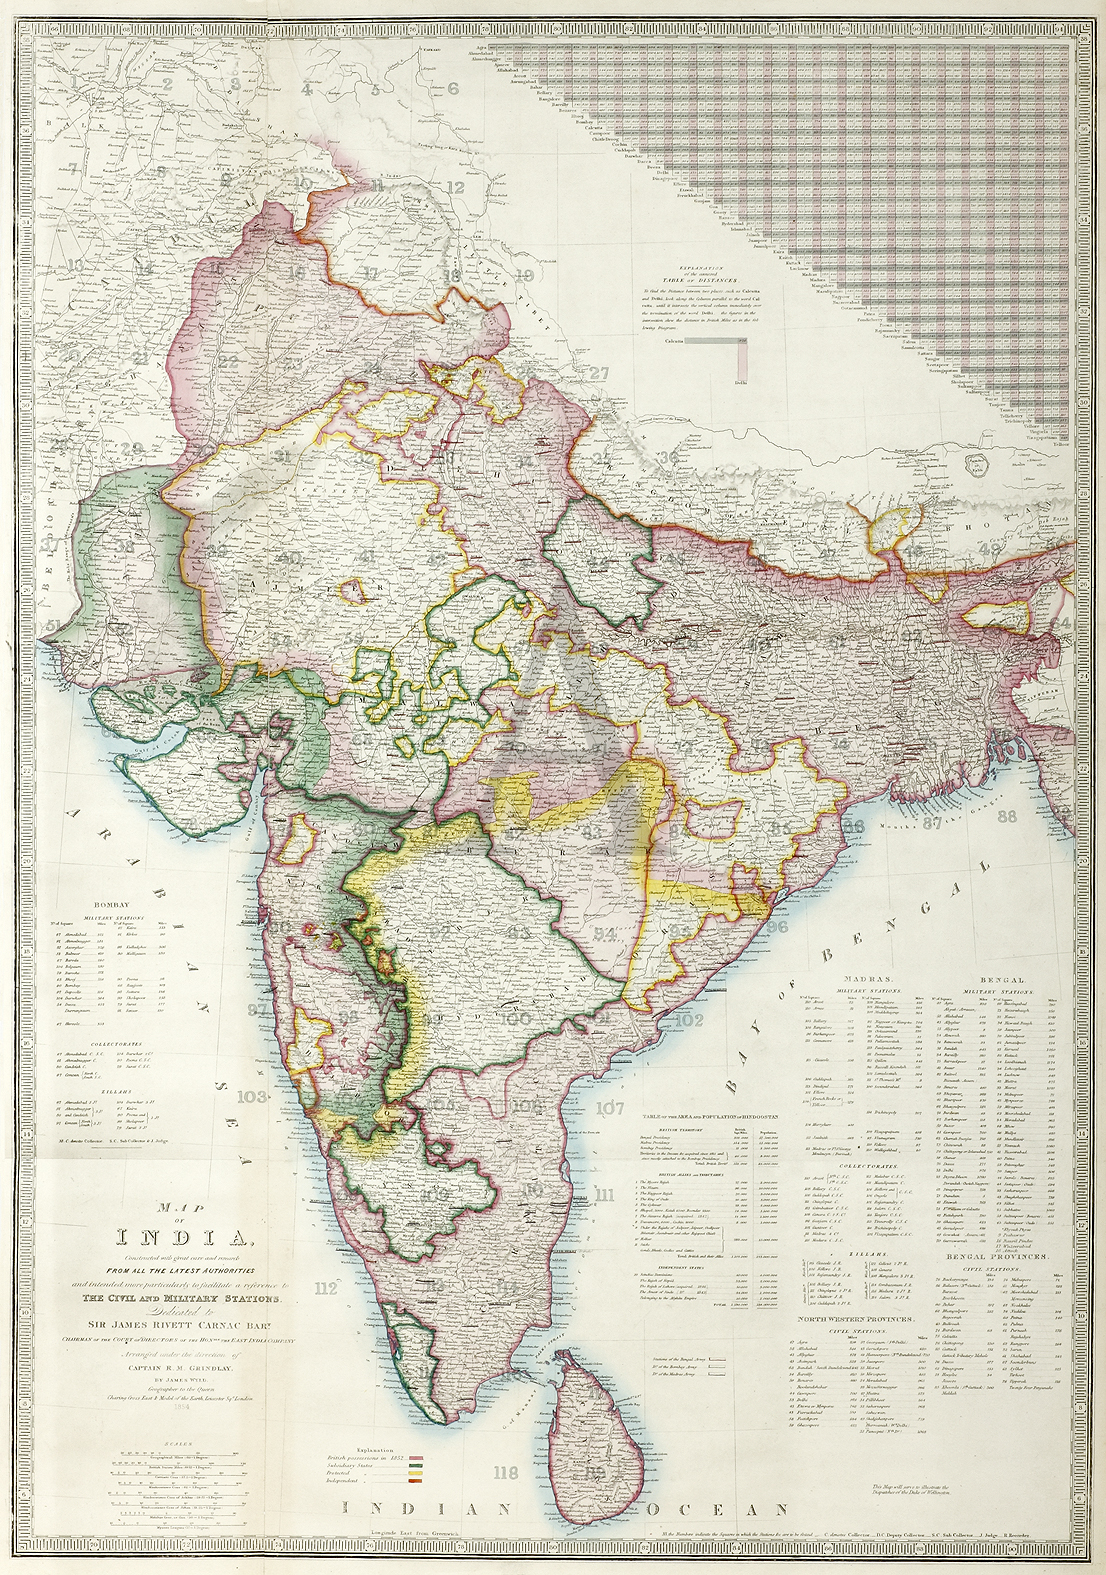 Map of India, Contructed with great care and research FROM ALL THE LATESTS AUTHORITIES and intended more particularly to facilitate a reference to the Civil Authorities and intended more particularly to facilitate a reference to THE CIVIL AND MILITARY STA - Antique Print from 1855